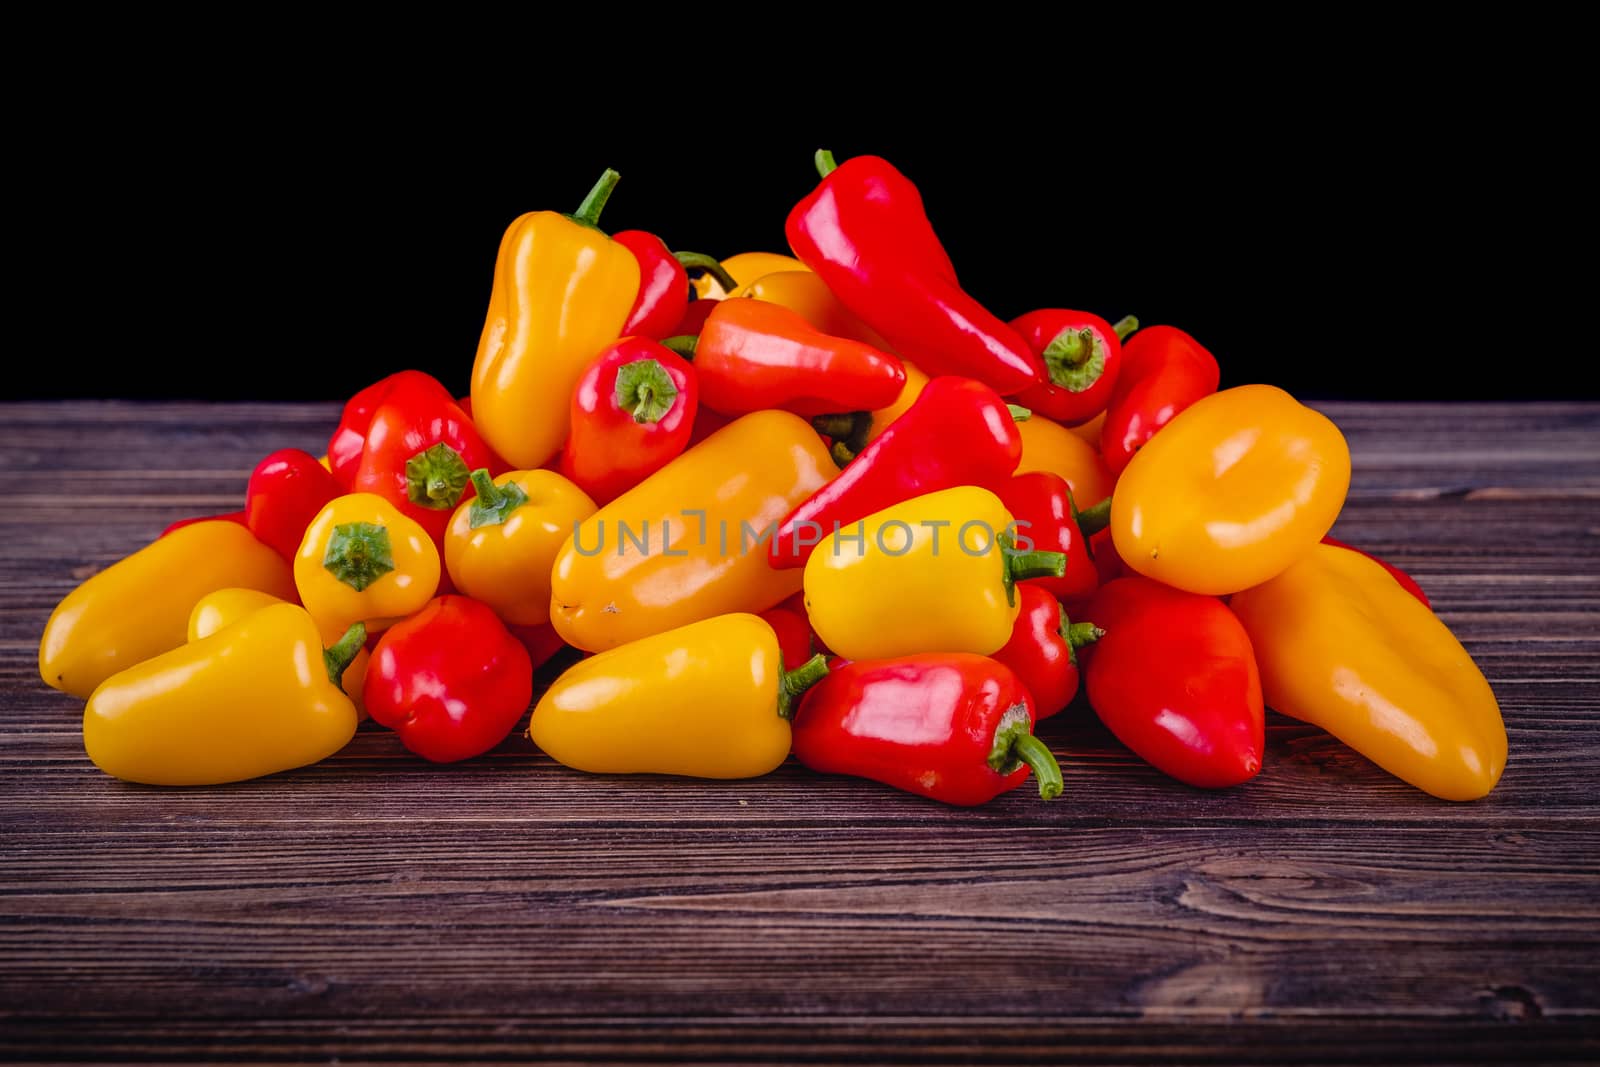 Fresh colored bell peppers on a wooden table on a rustic wooden background, selective focus